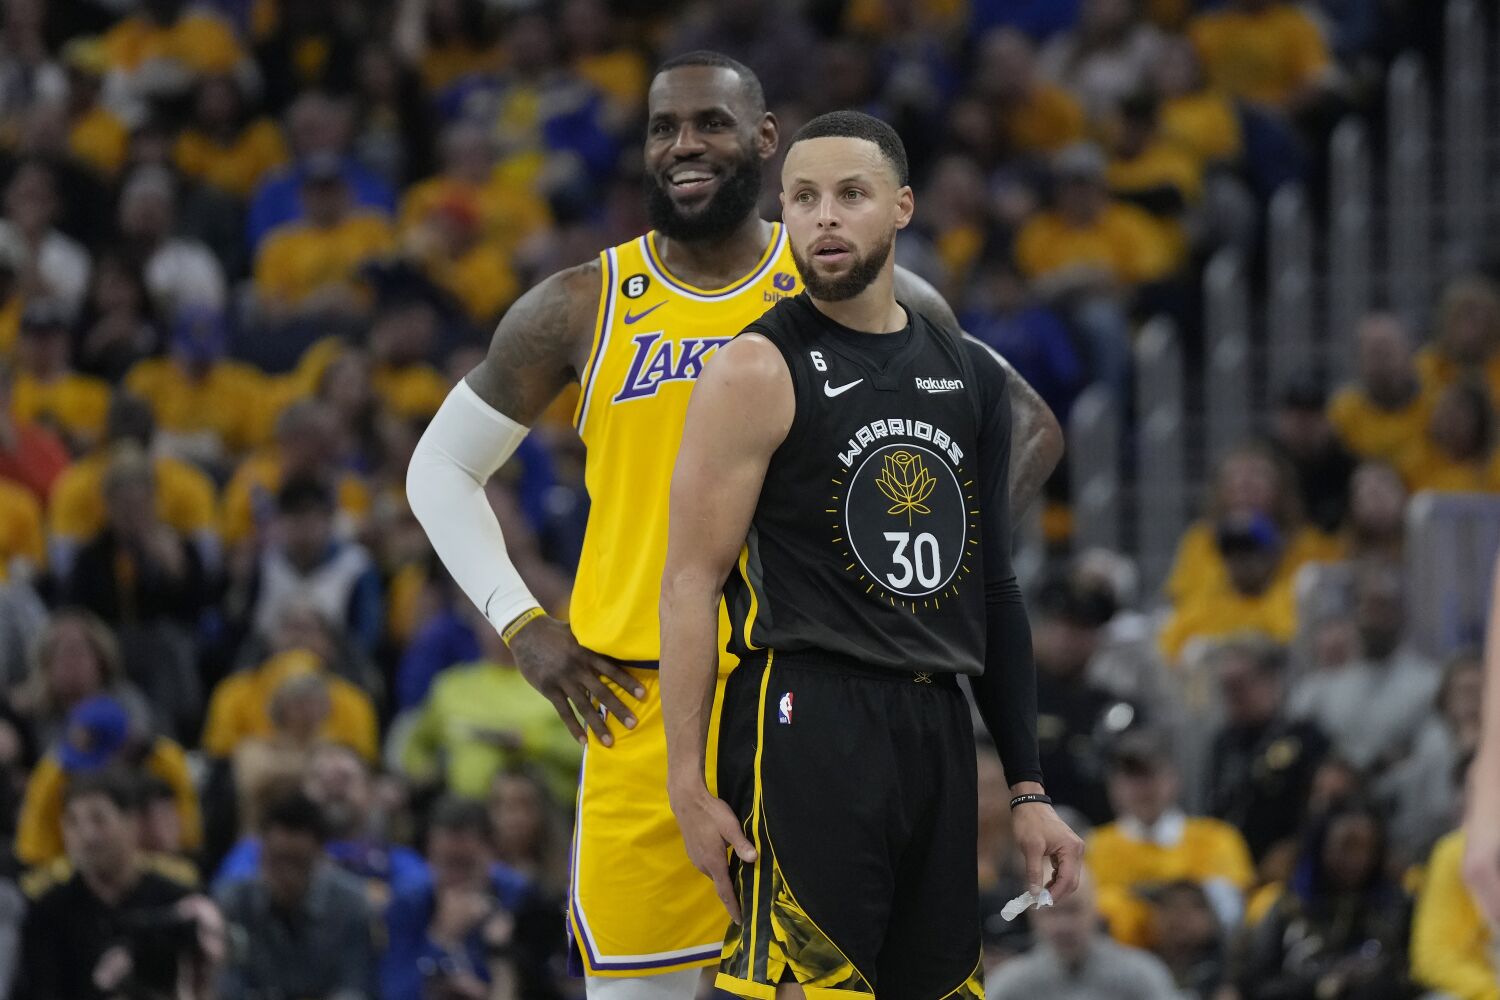 Want Lakers vs. Warriors playoff tickets? No problem, as long as money is no object